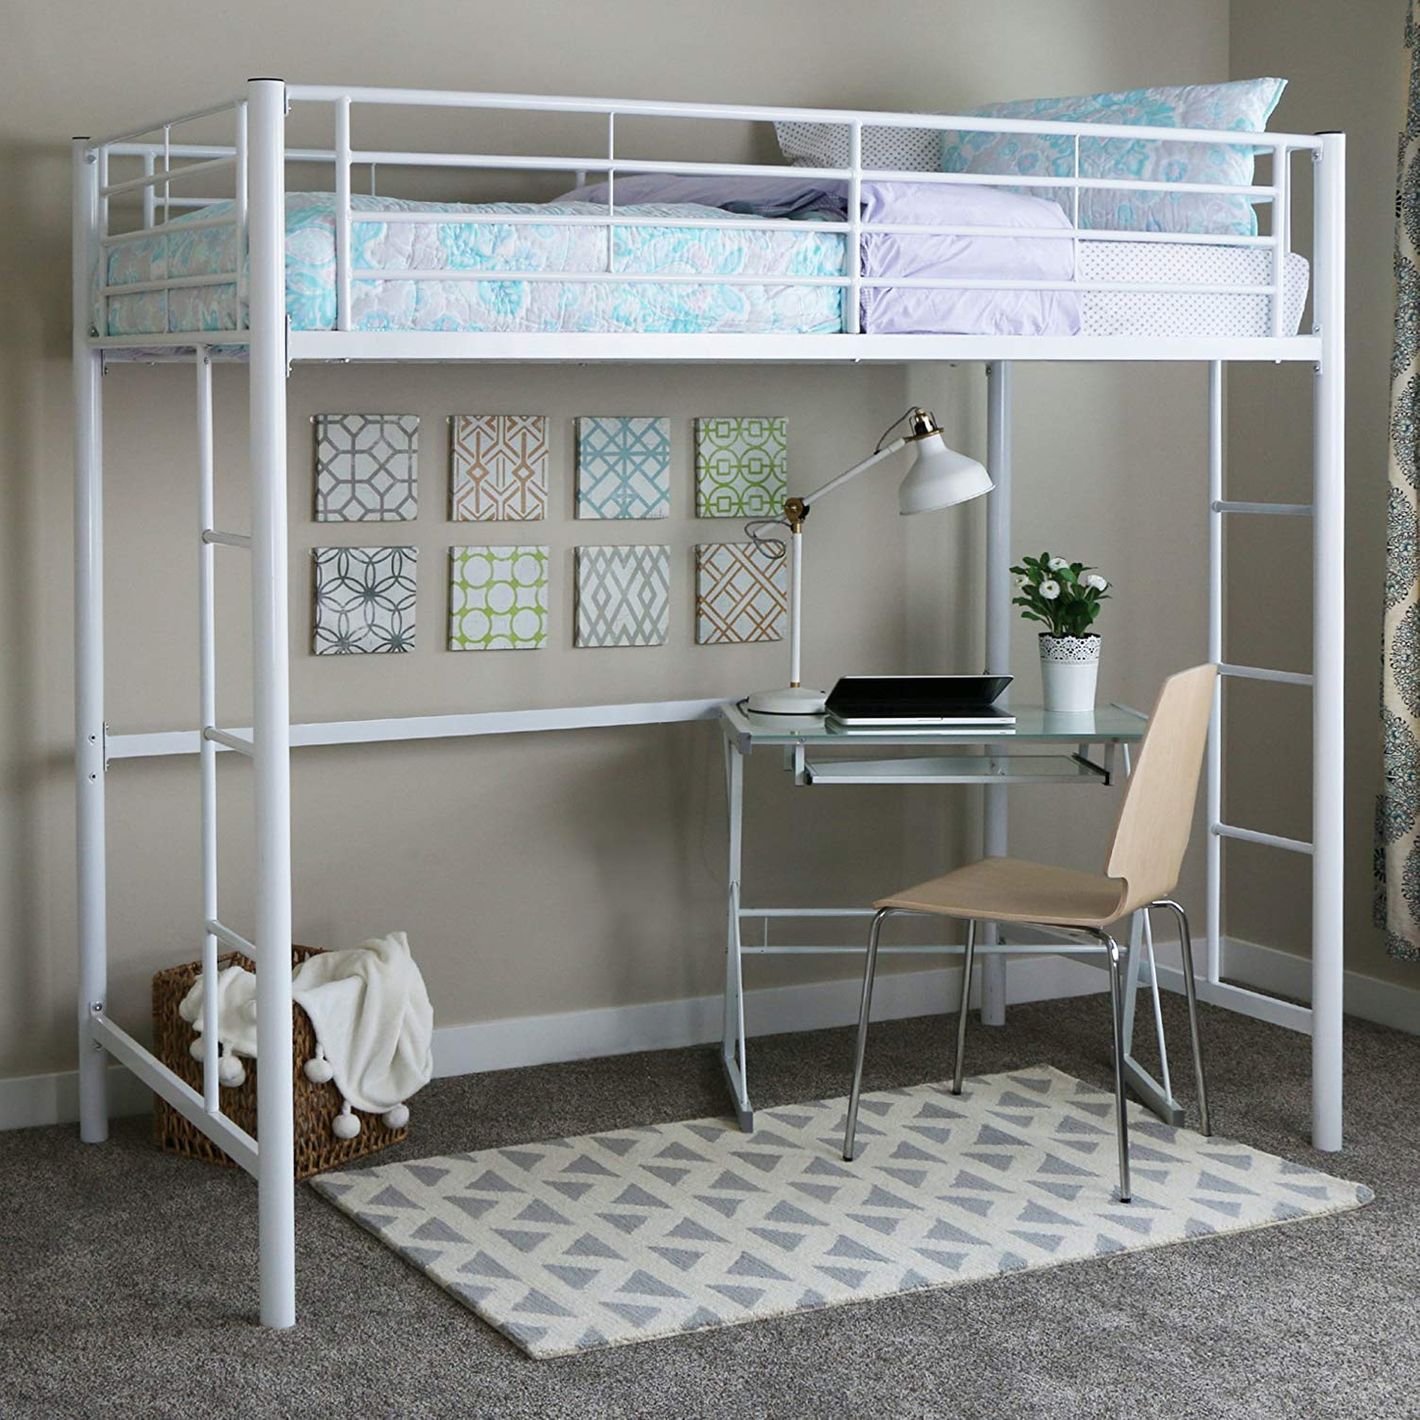 8 Best Loft Beds 2019 The Strategist, Bunk Bed Without Bottom